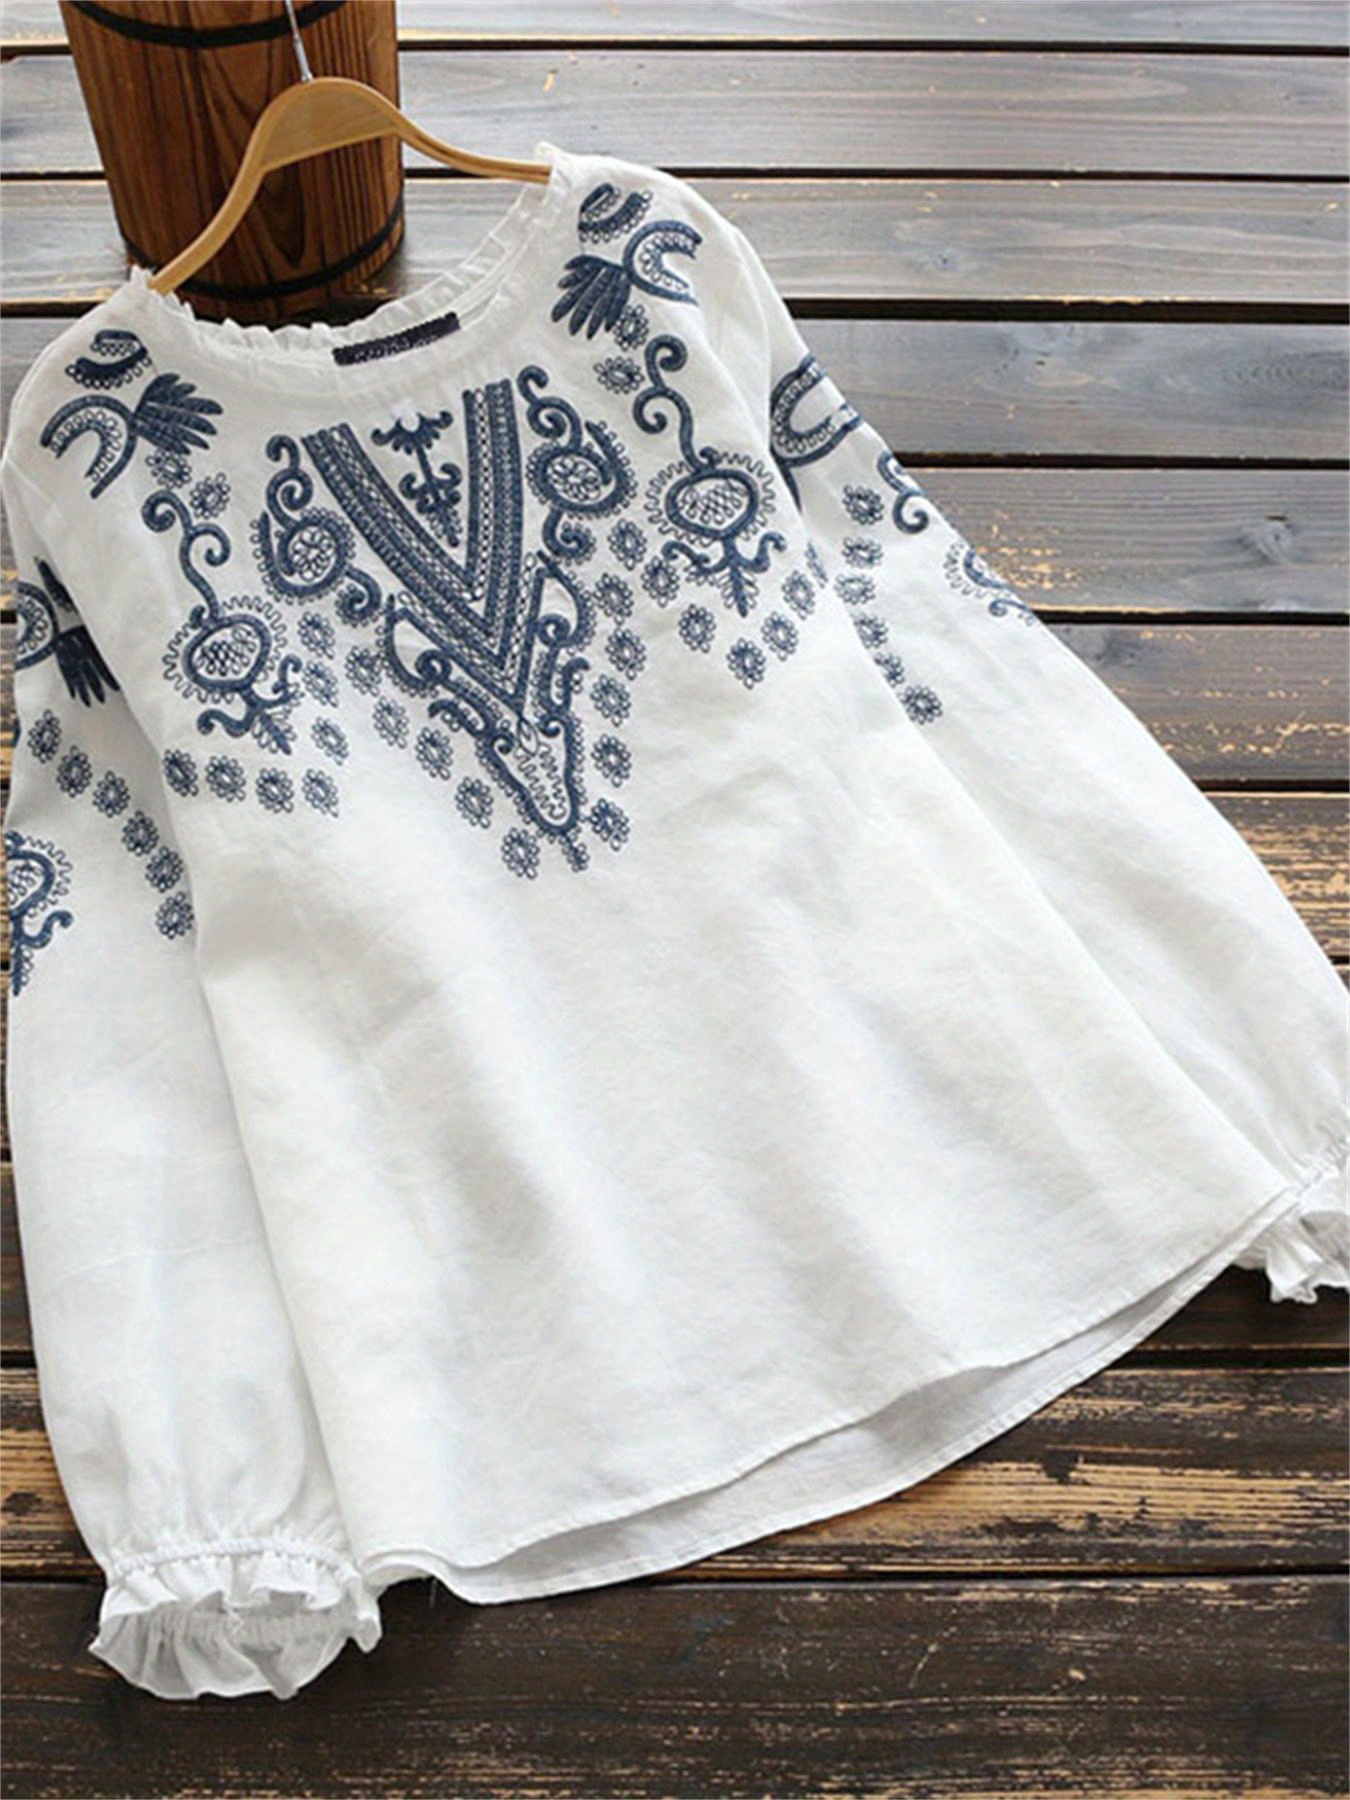 Embroidered Tops